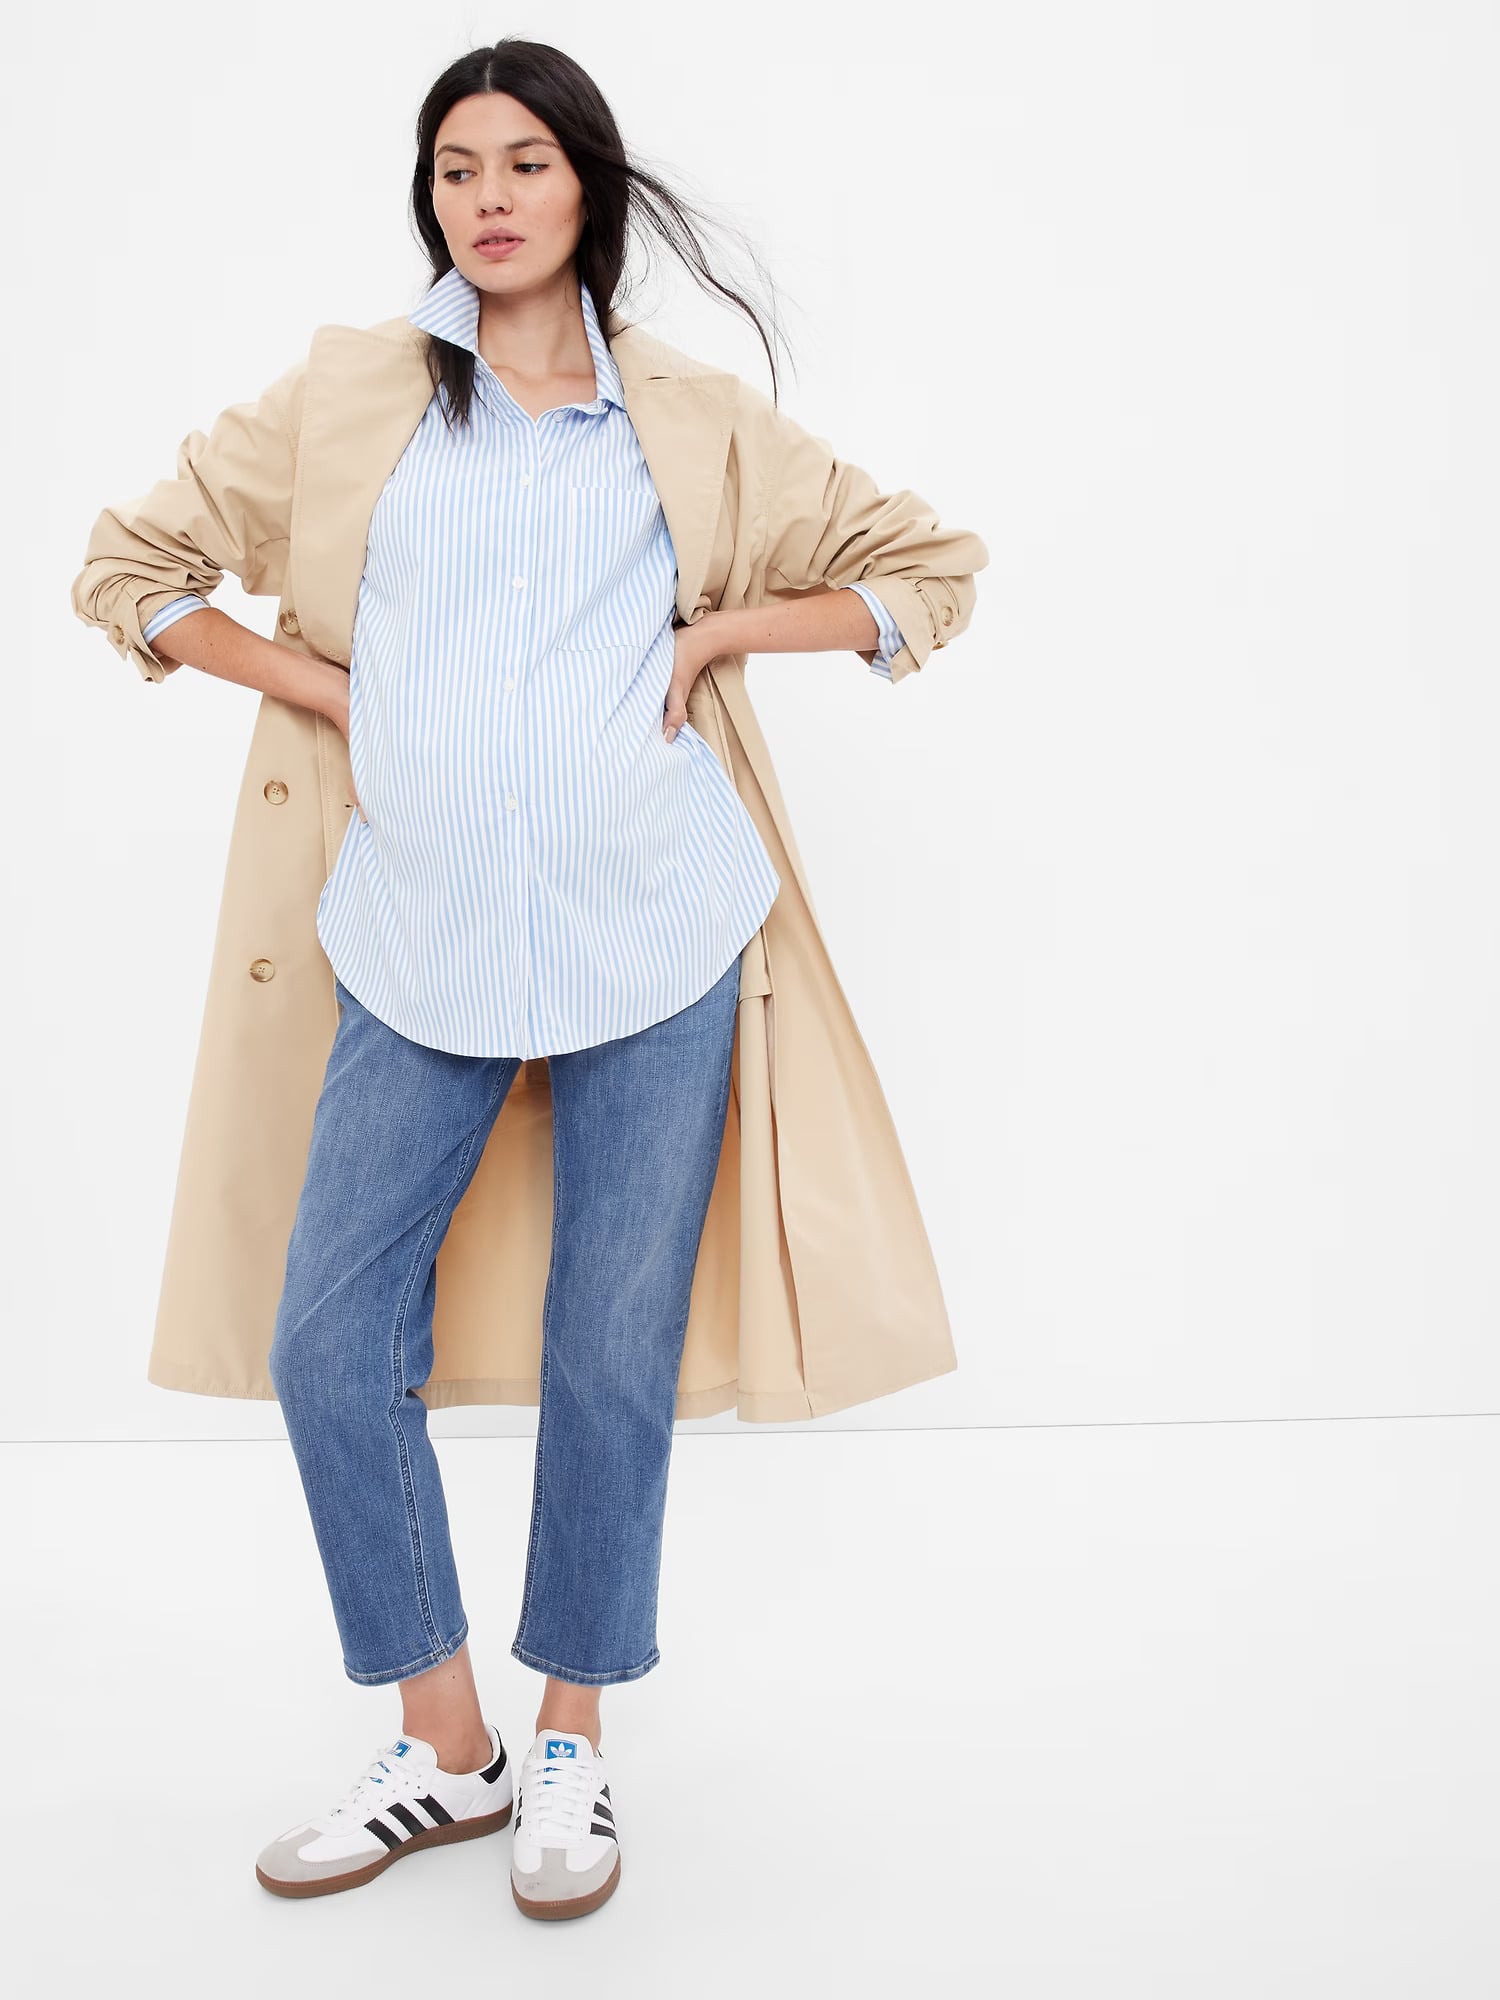 The perfect relaxed jeans for postpartum & momhood - ily